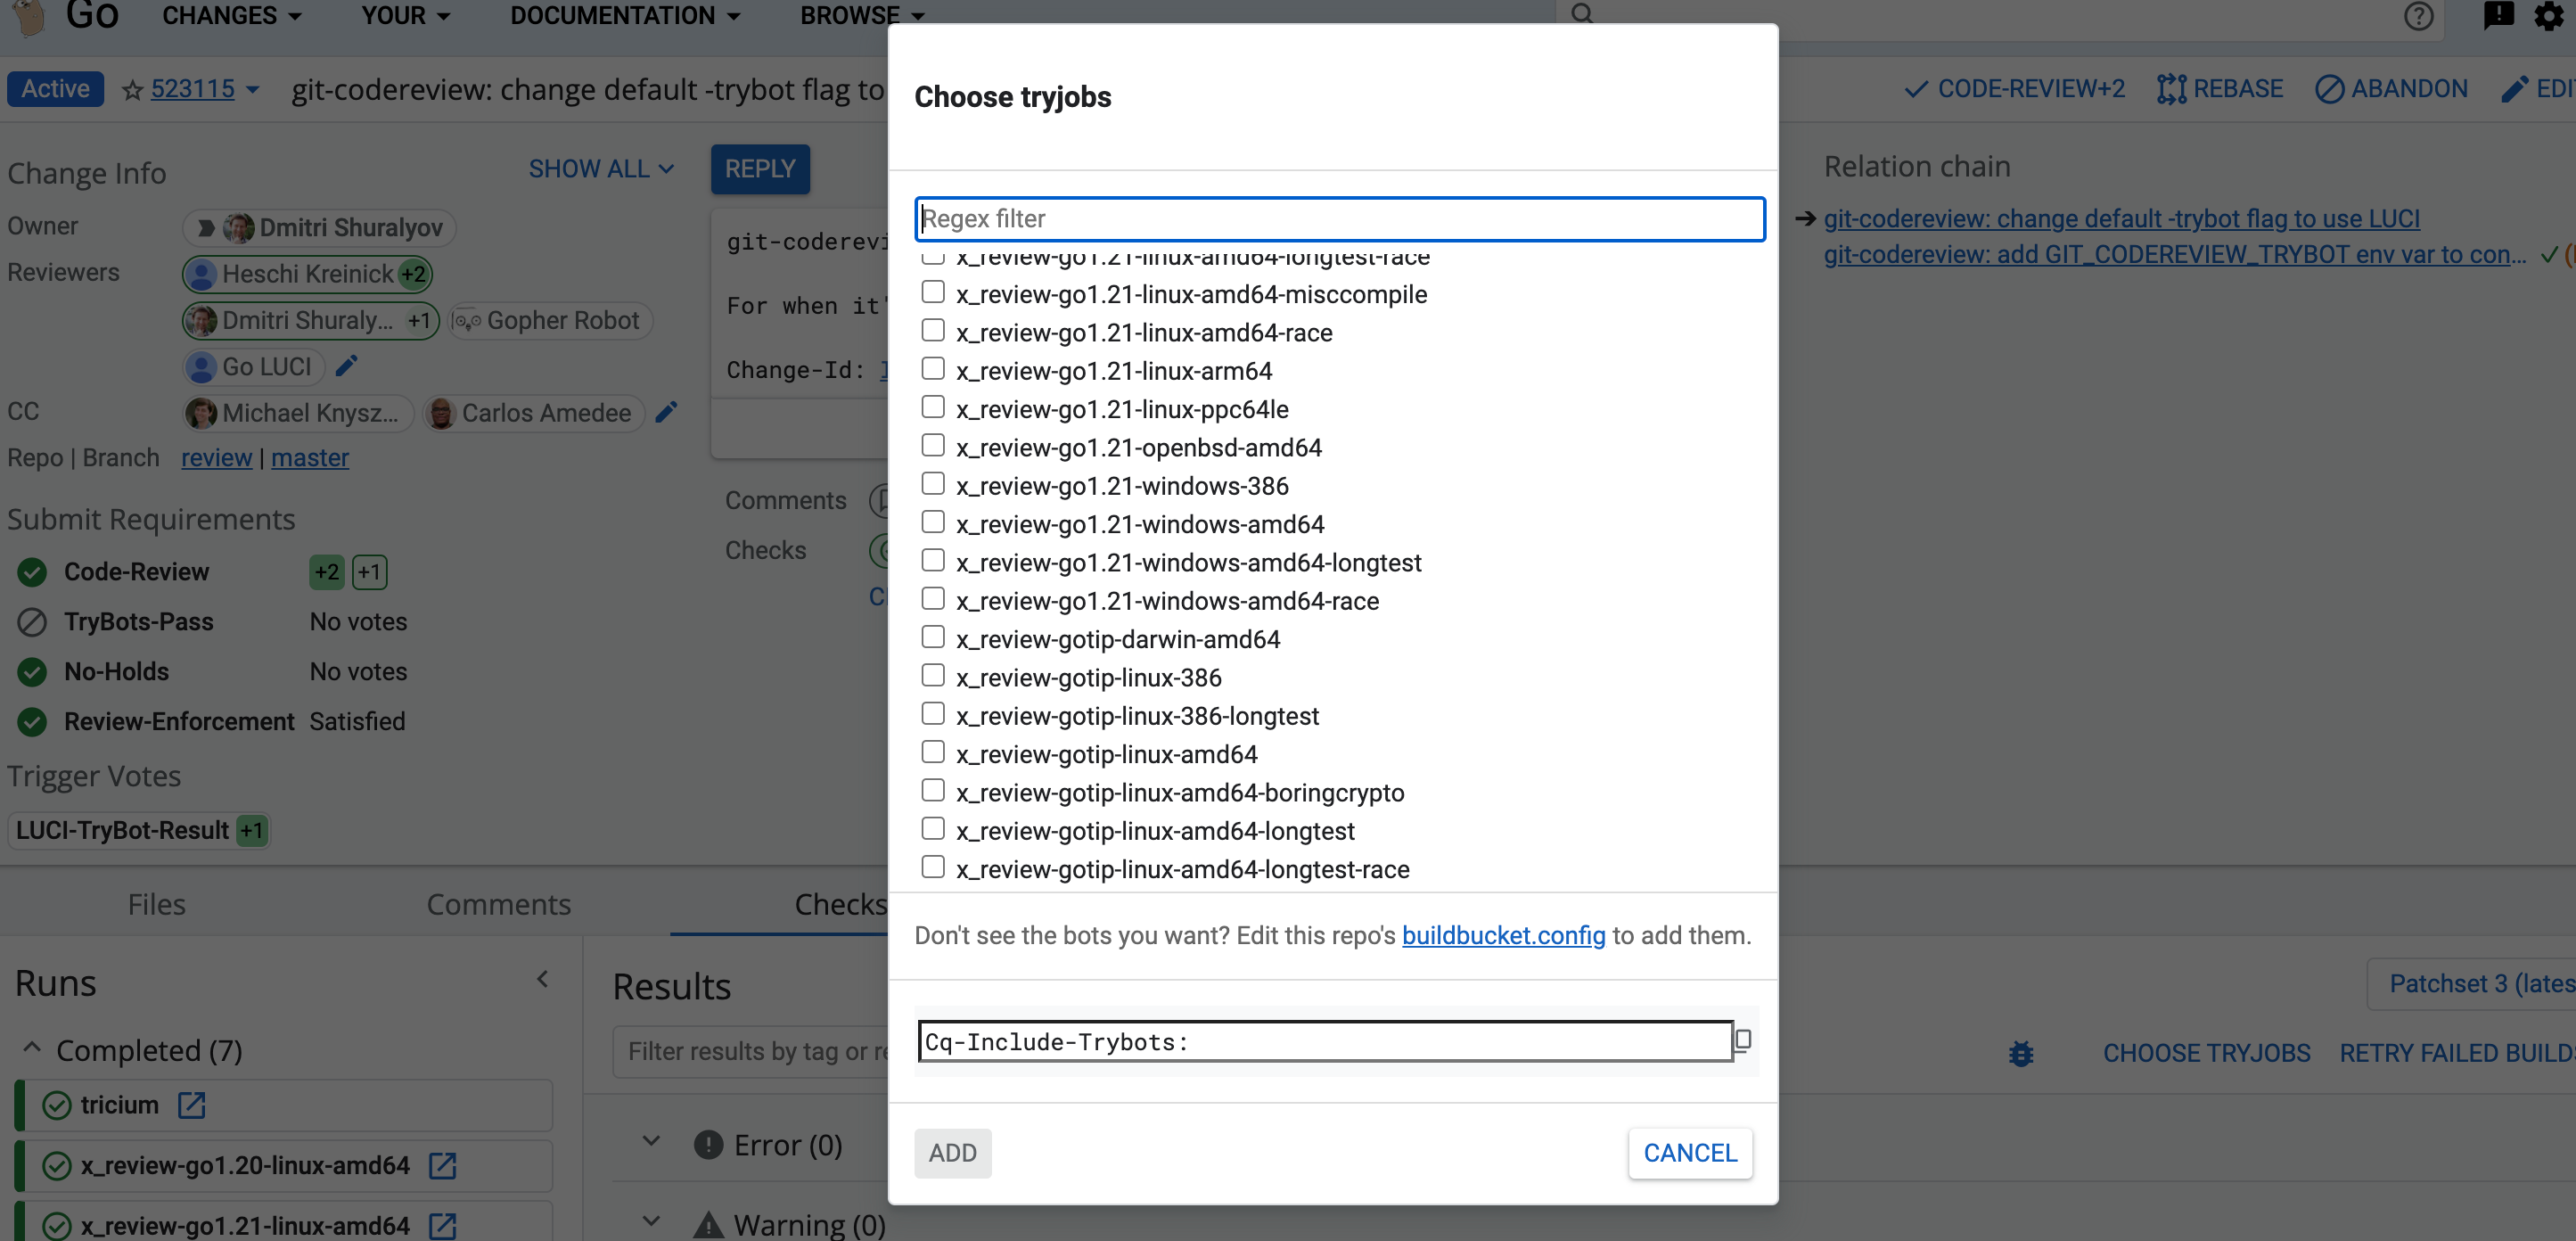 An example of the Choose Tryjobs dialog.